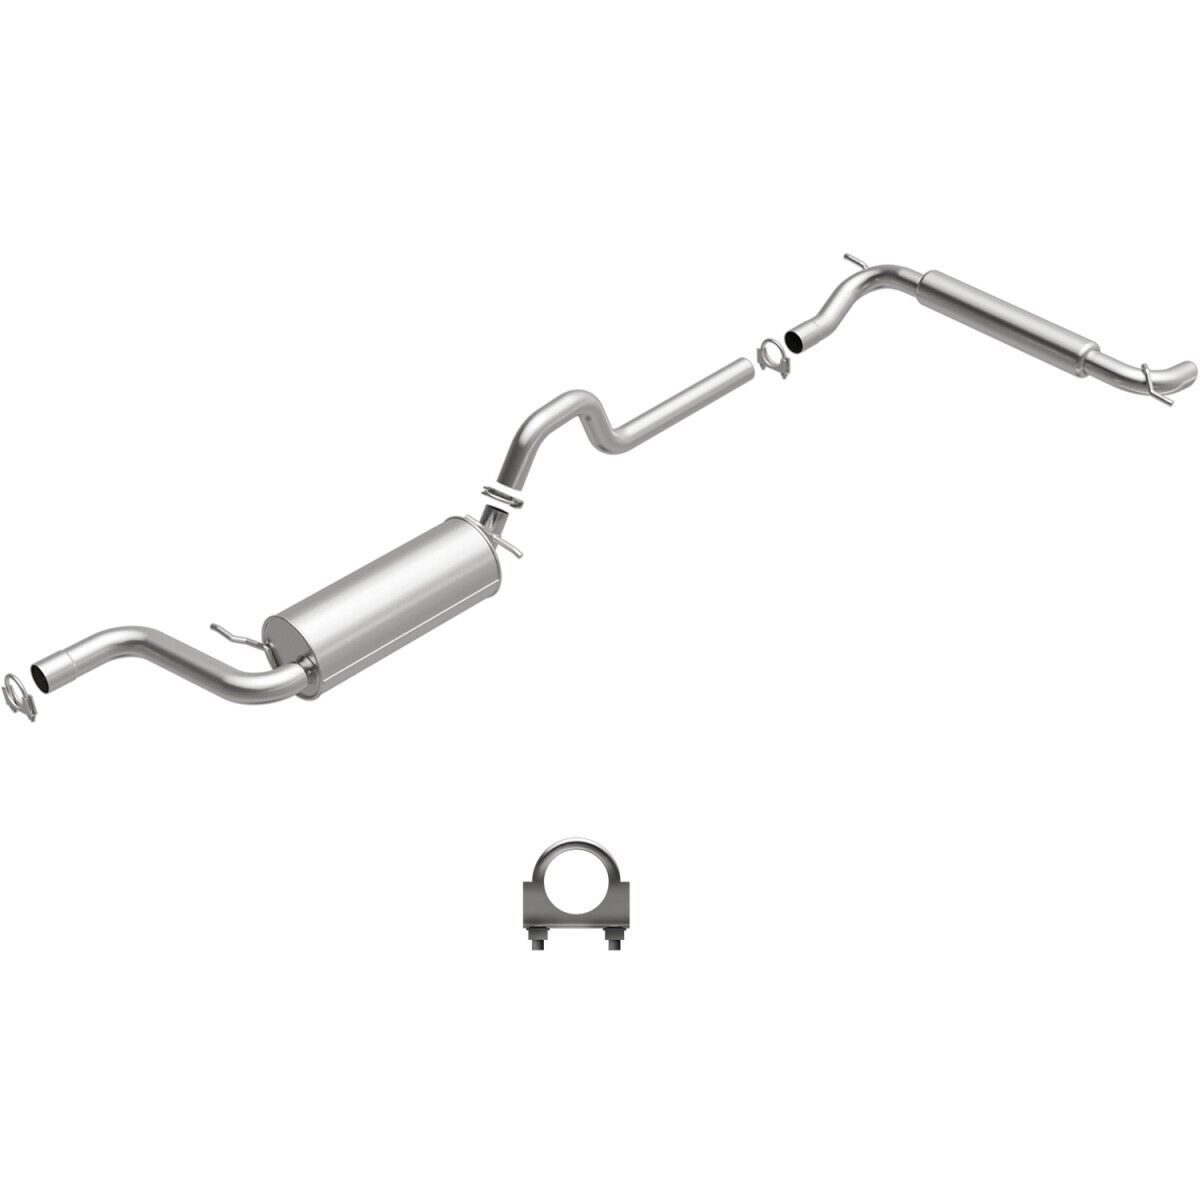 106-0103 BRExhaust Exhaust System for Town and Country Dodge Grand Caravan 05-07